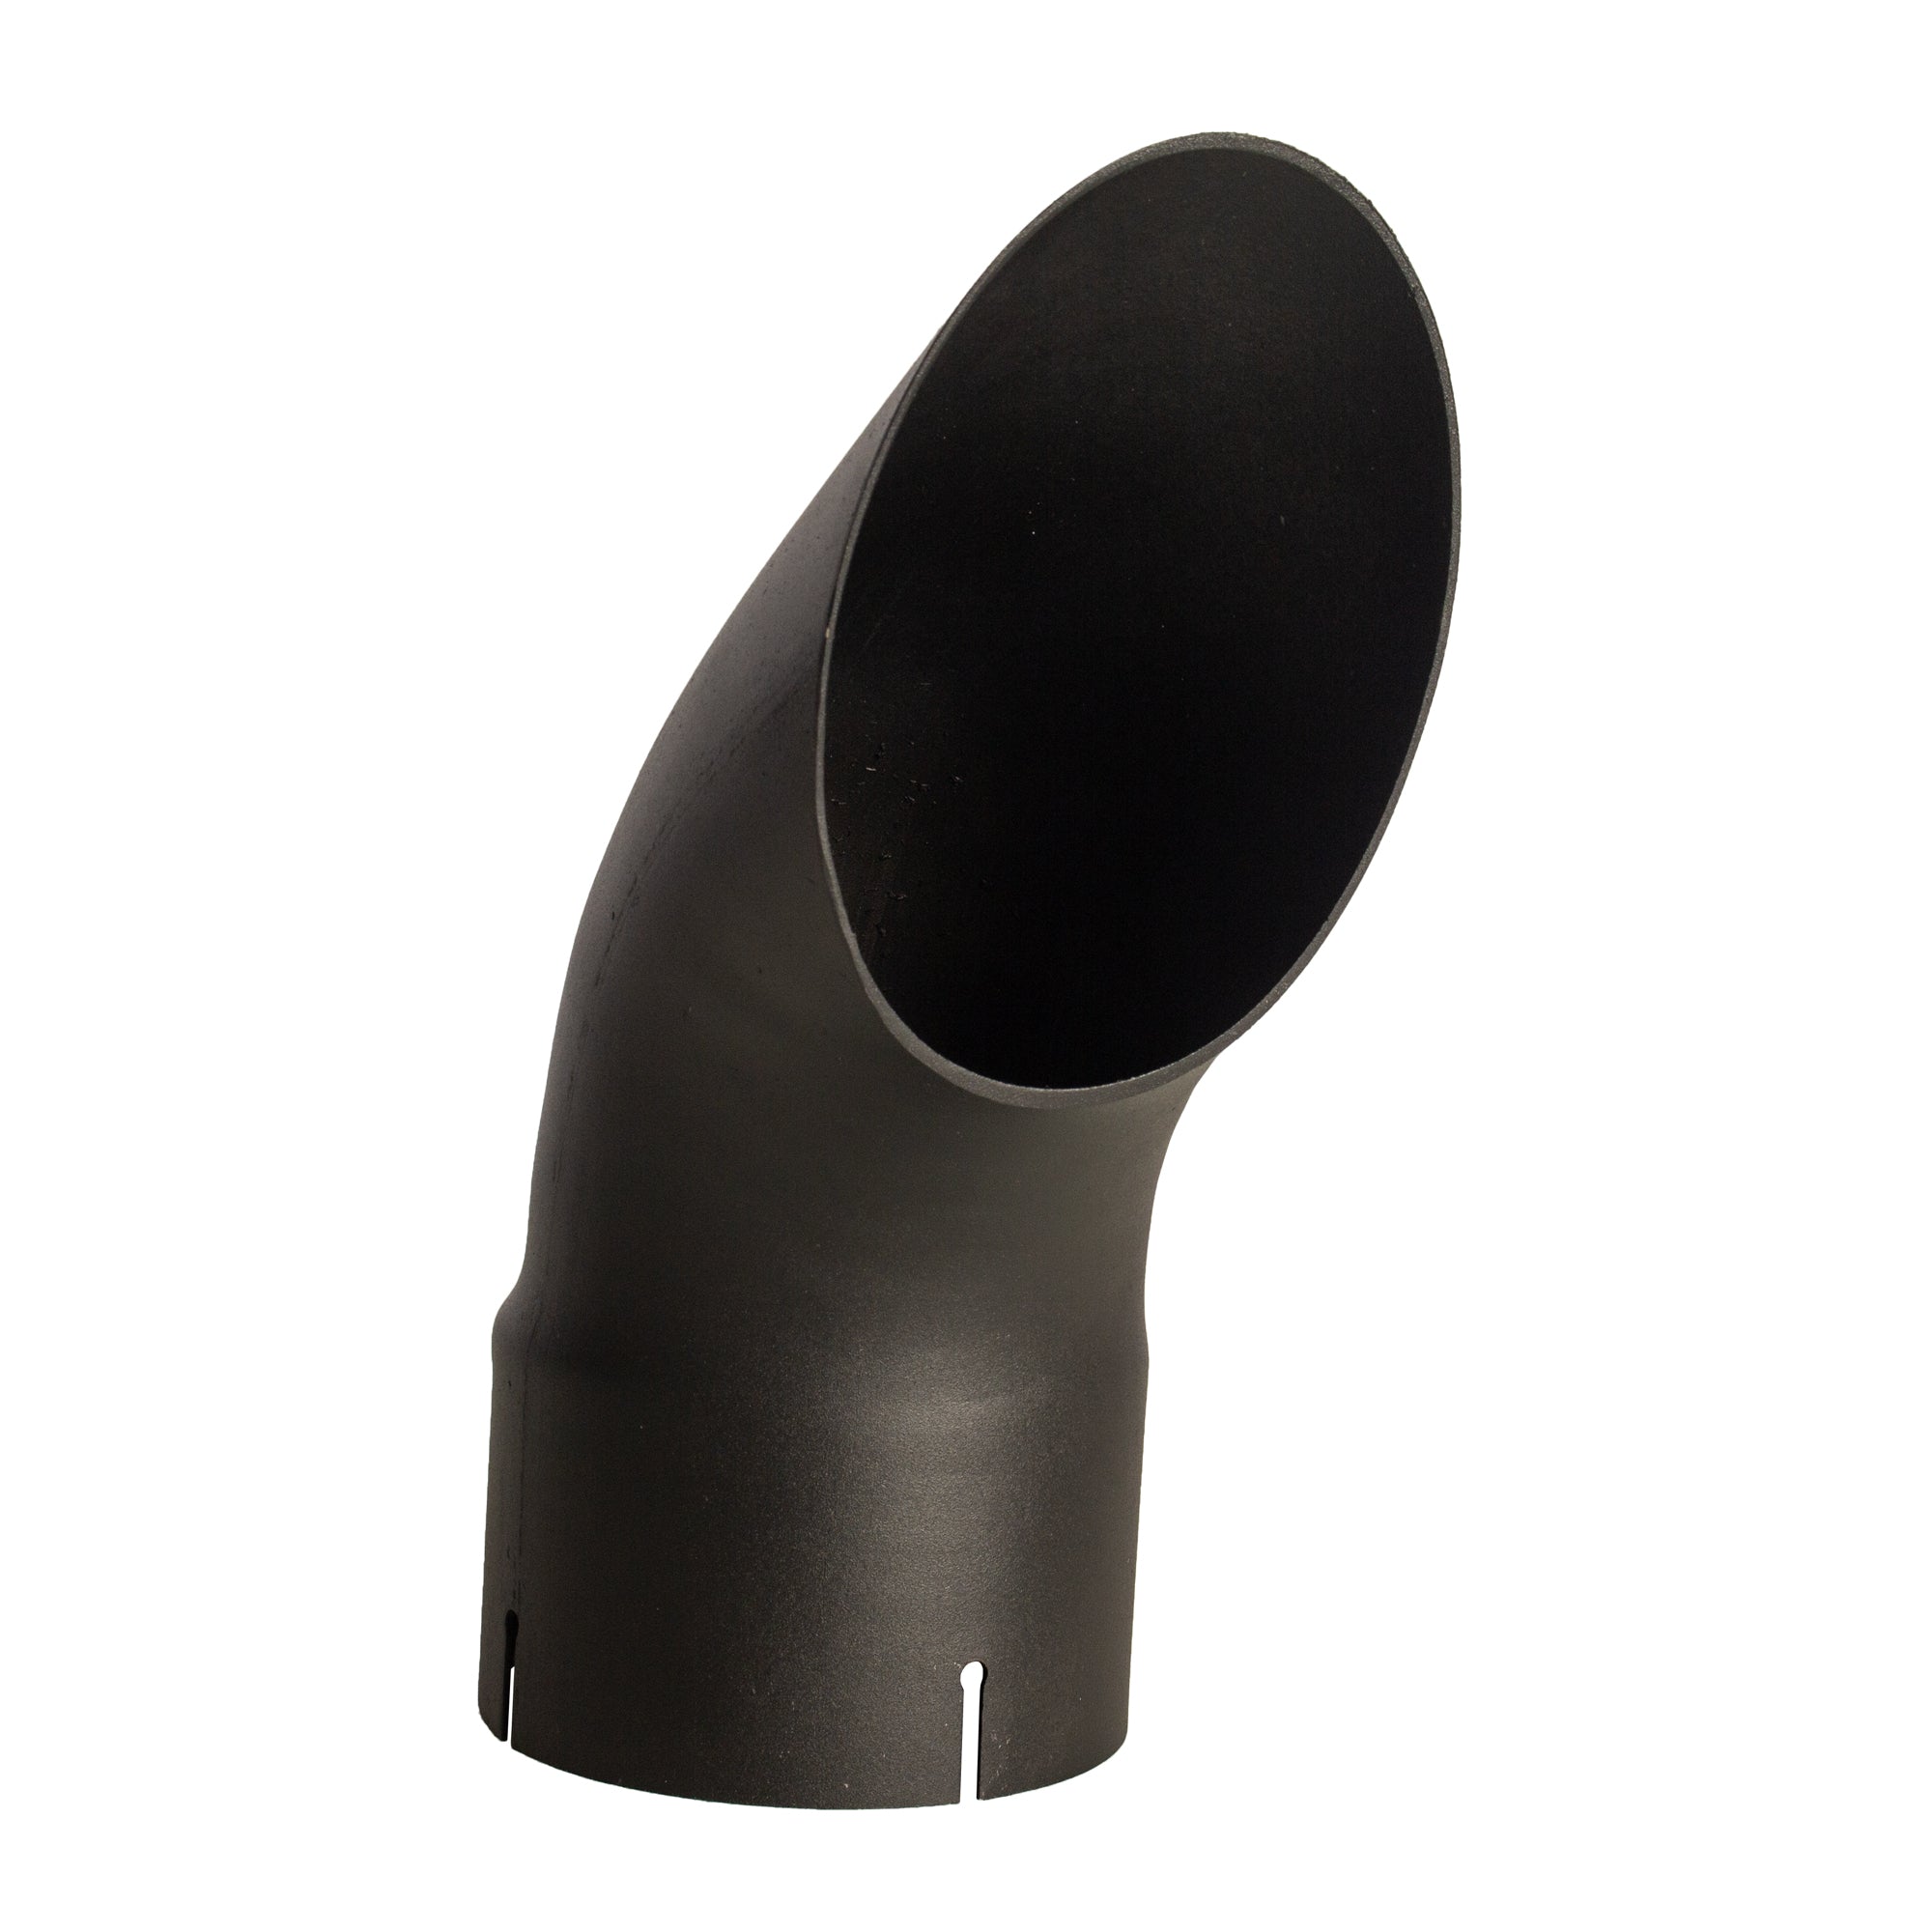 Exhaust Stack Pipe Replacement for Universal - 5" x 12", Curved Black